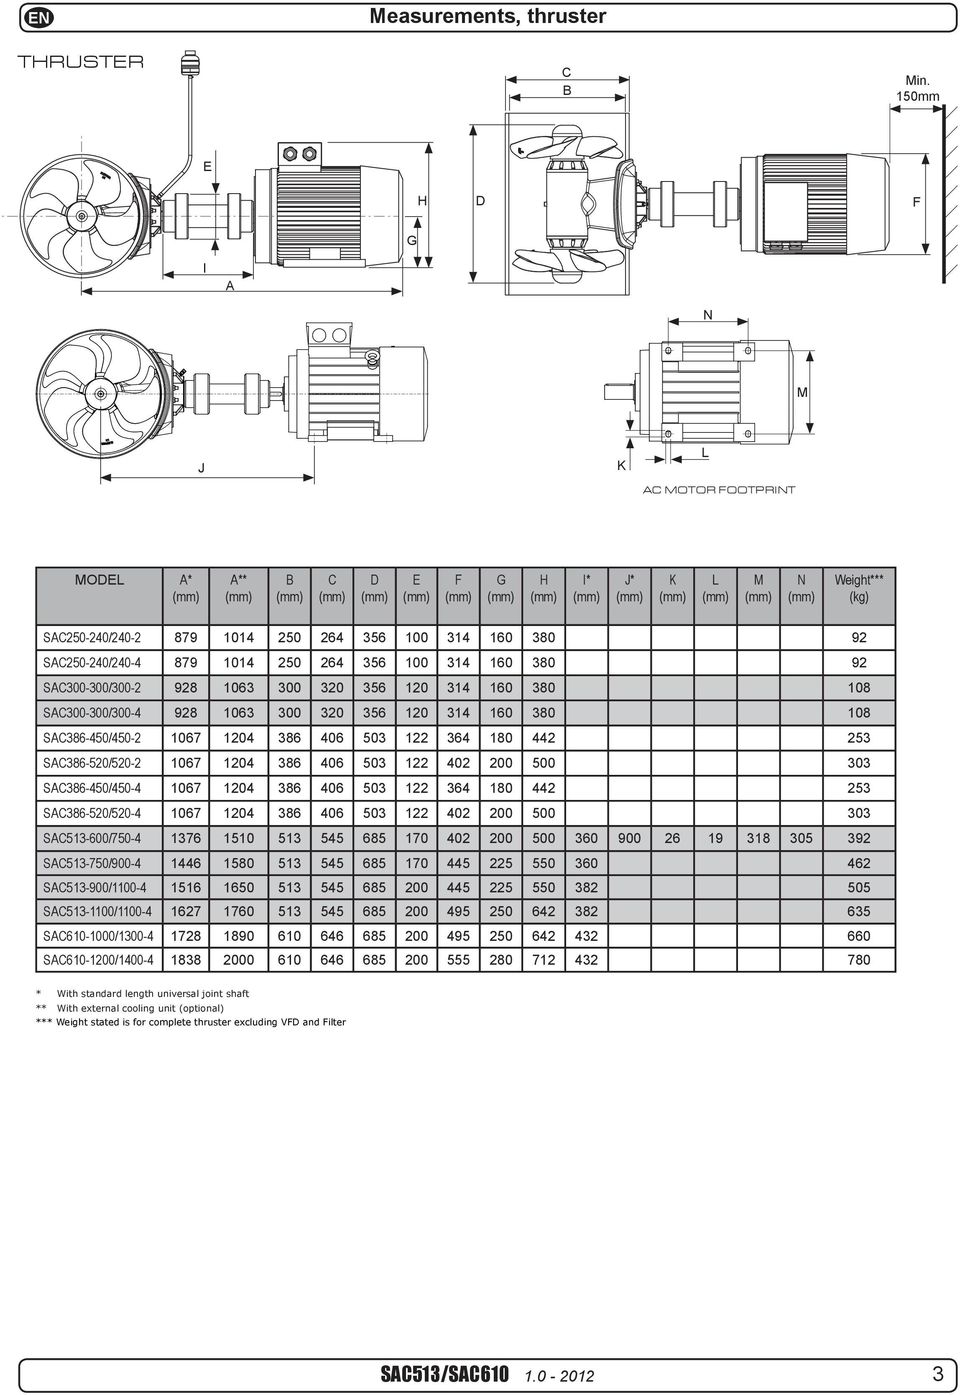 2011 Assembly SH1000 AC Version A Part nr Weight Size Scale 2 N/A G H A3 E 1 Edition Sheet 1 1 / 1 1 F F 6 5 4 H G 3 1 1 C B Part nr Weight Size Scale N/A A3 2 E G C Edition Sheet 1 / 1